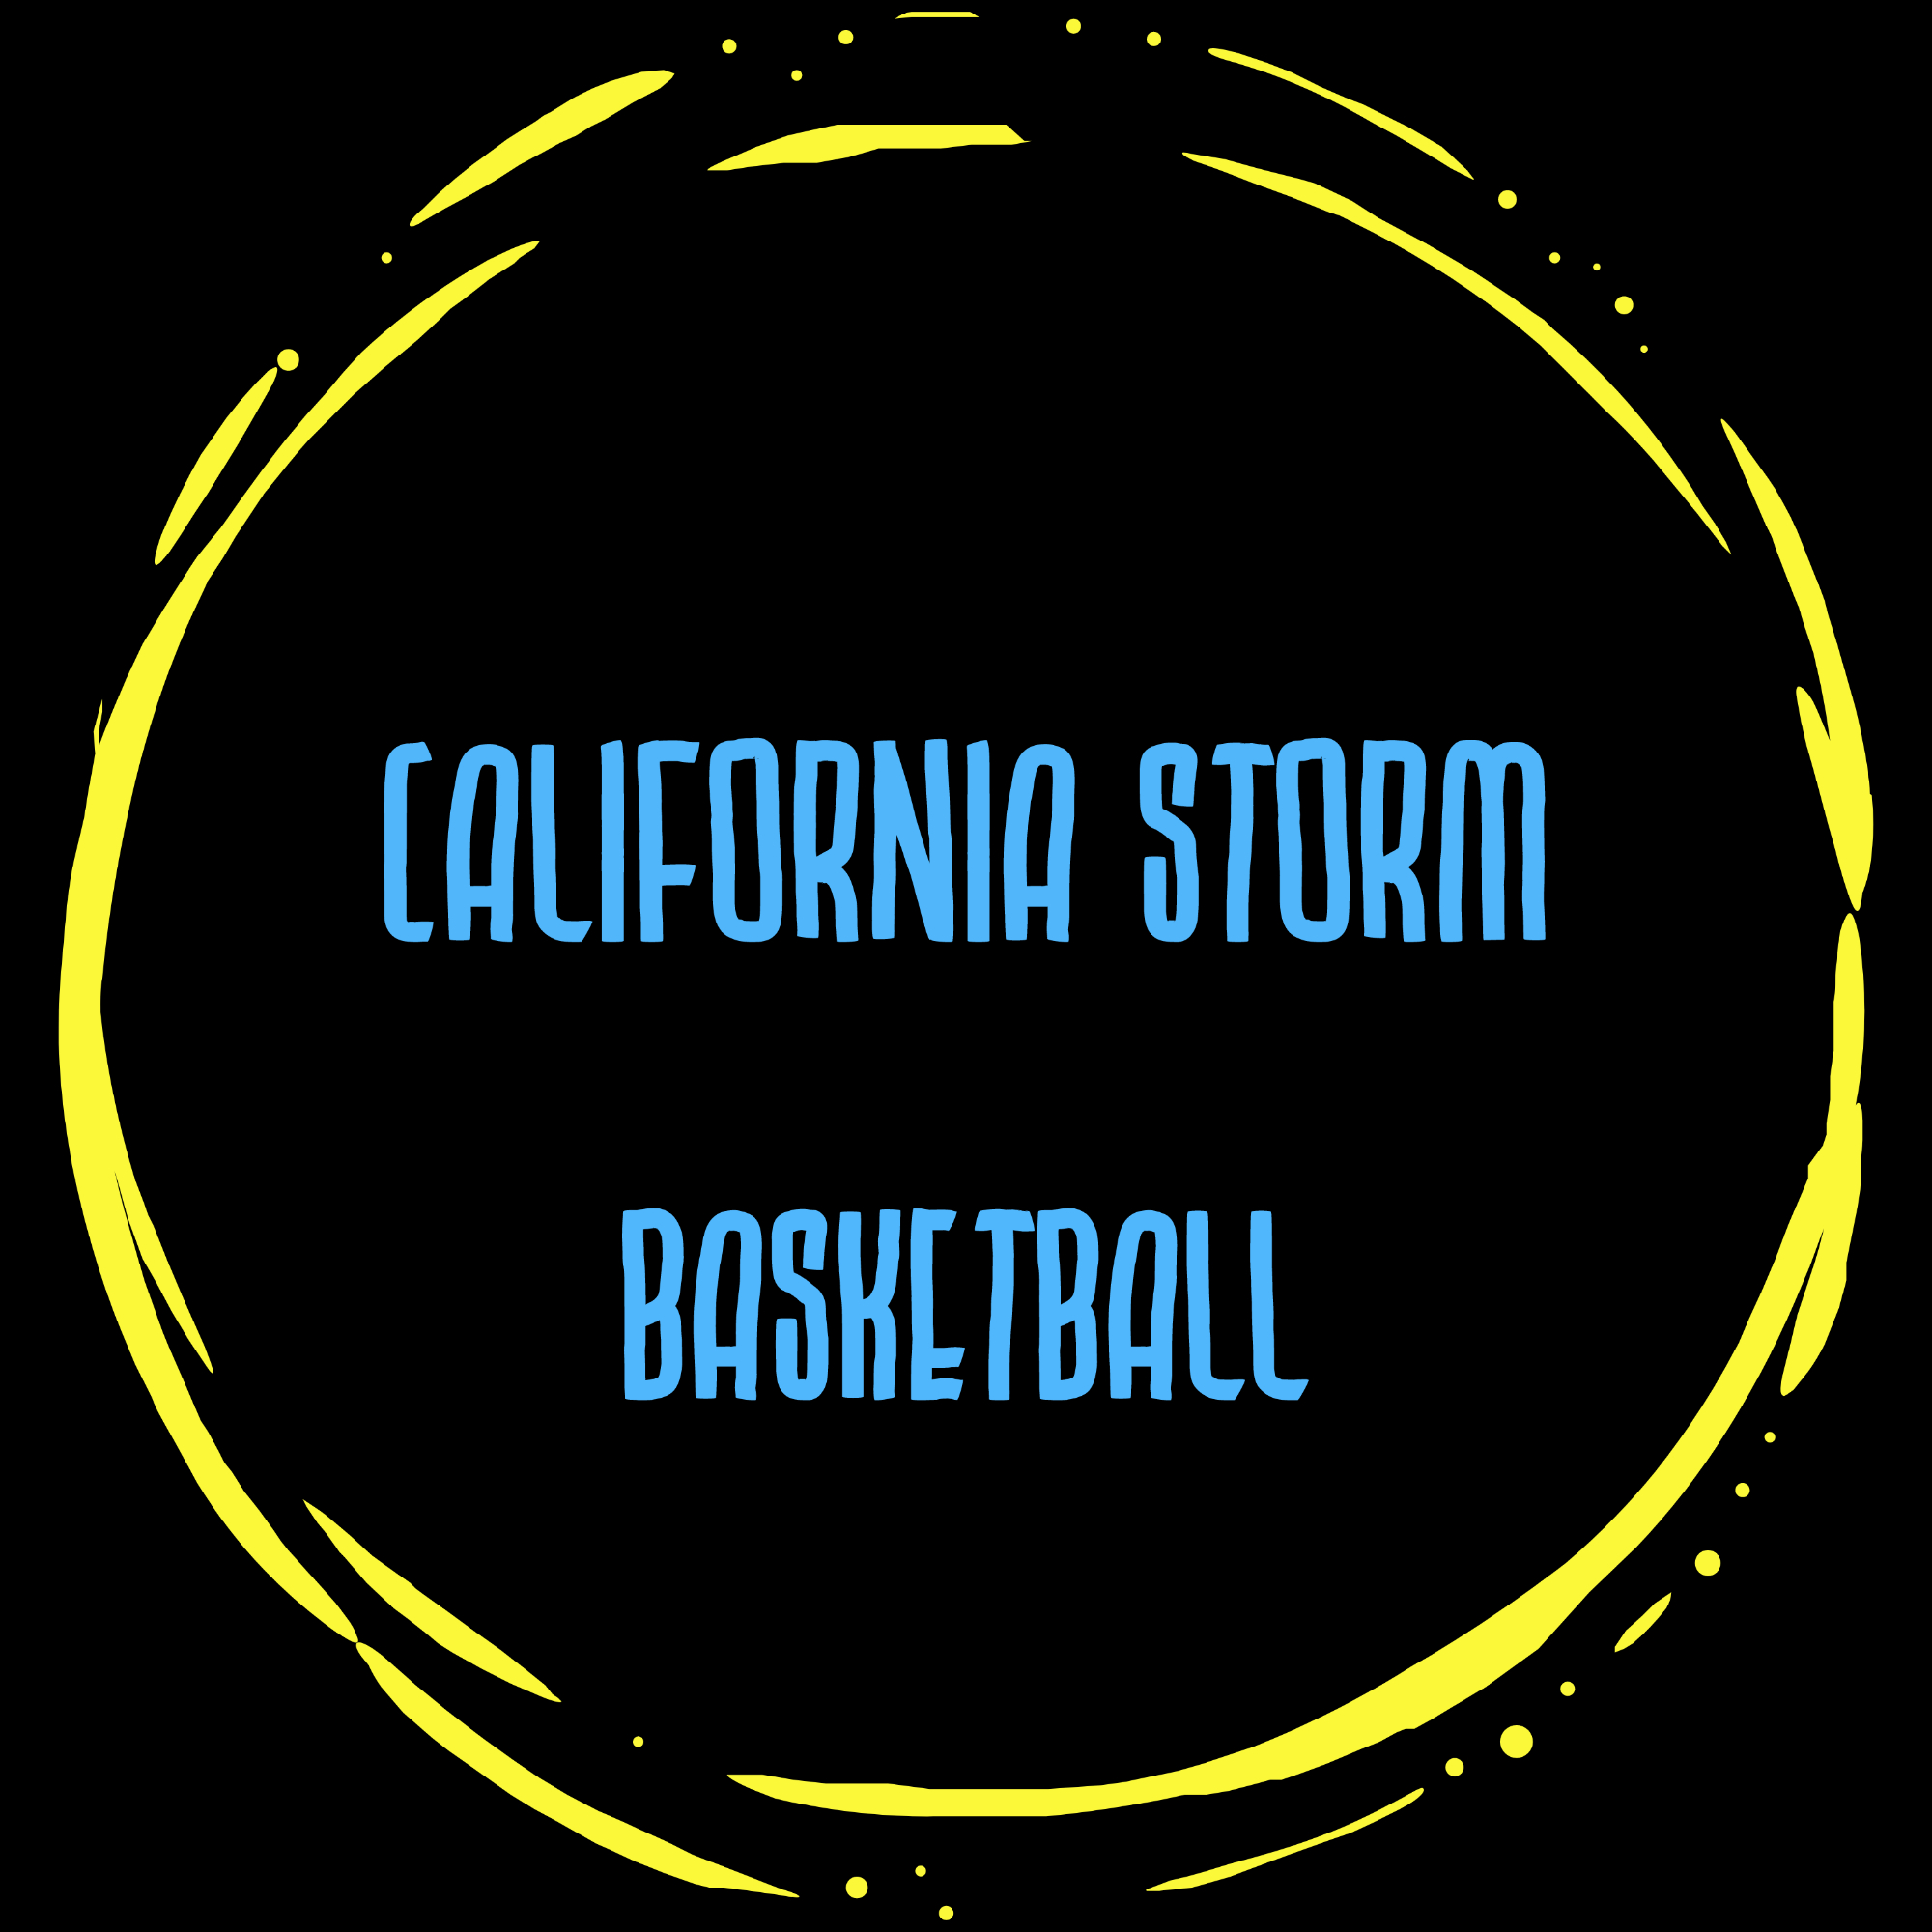 The official logo of California Storm